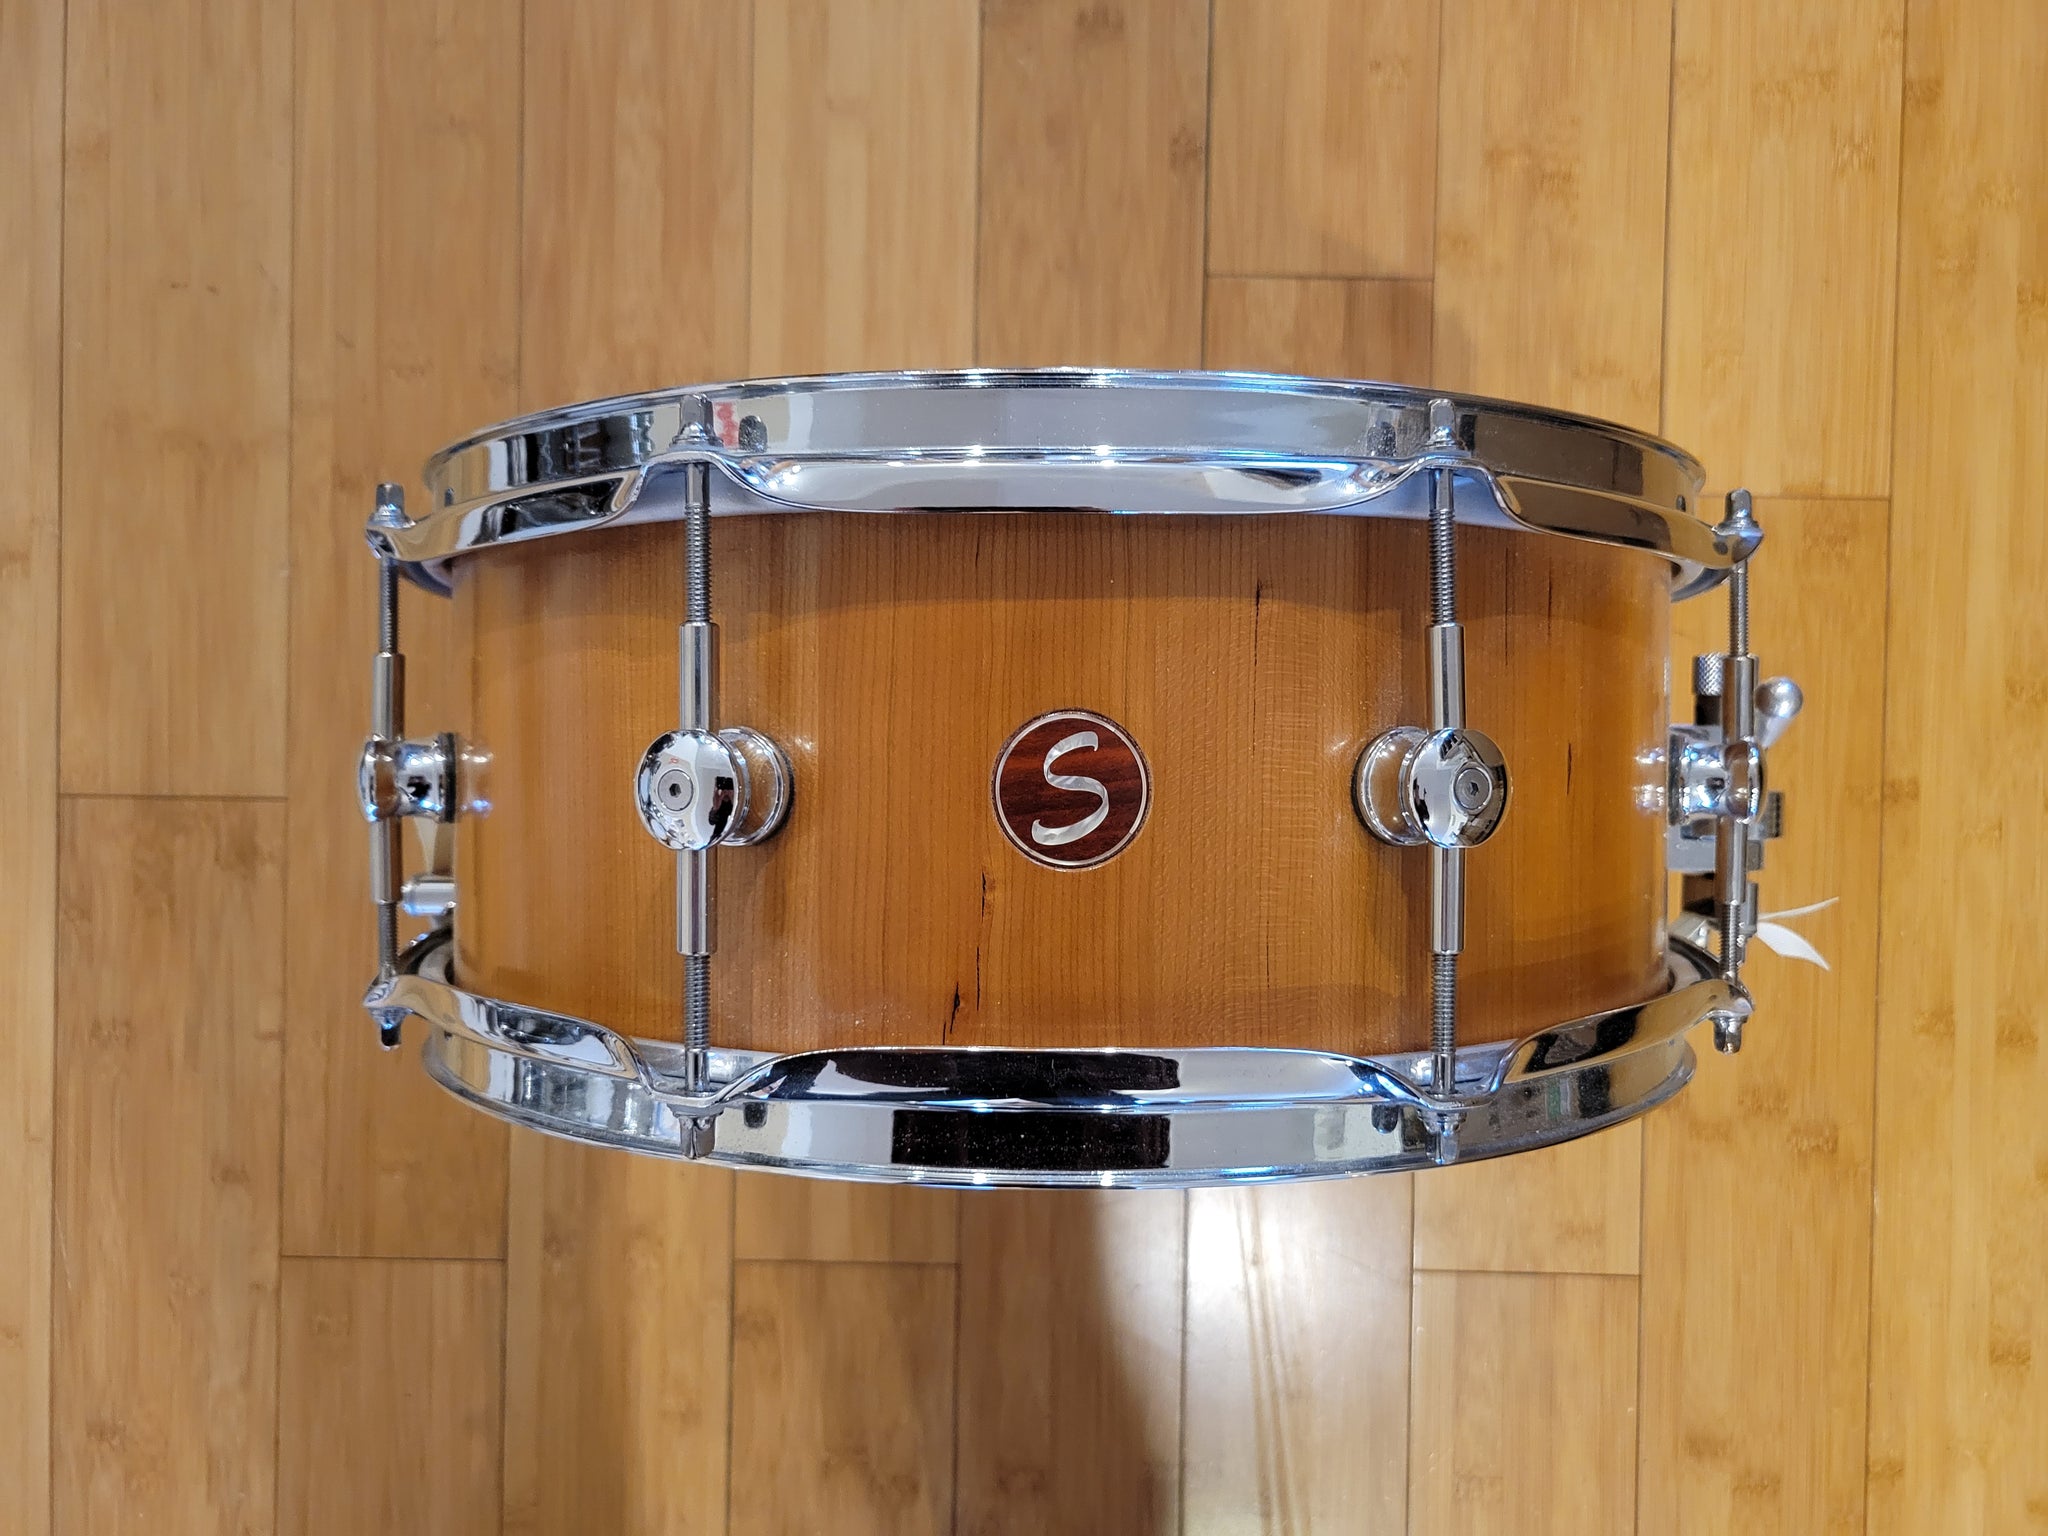 Snares - (Used) Sugar Percussion 6x14 Cherry Snare Drum